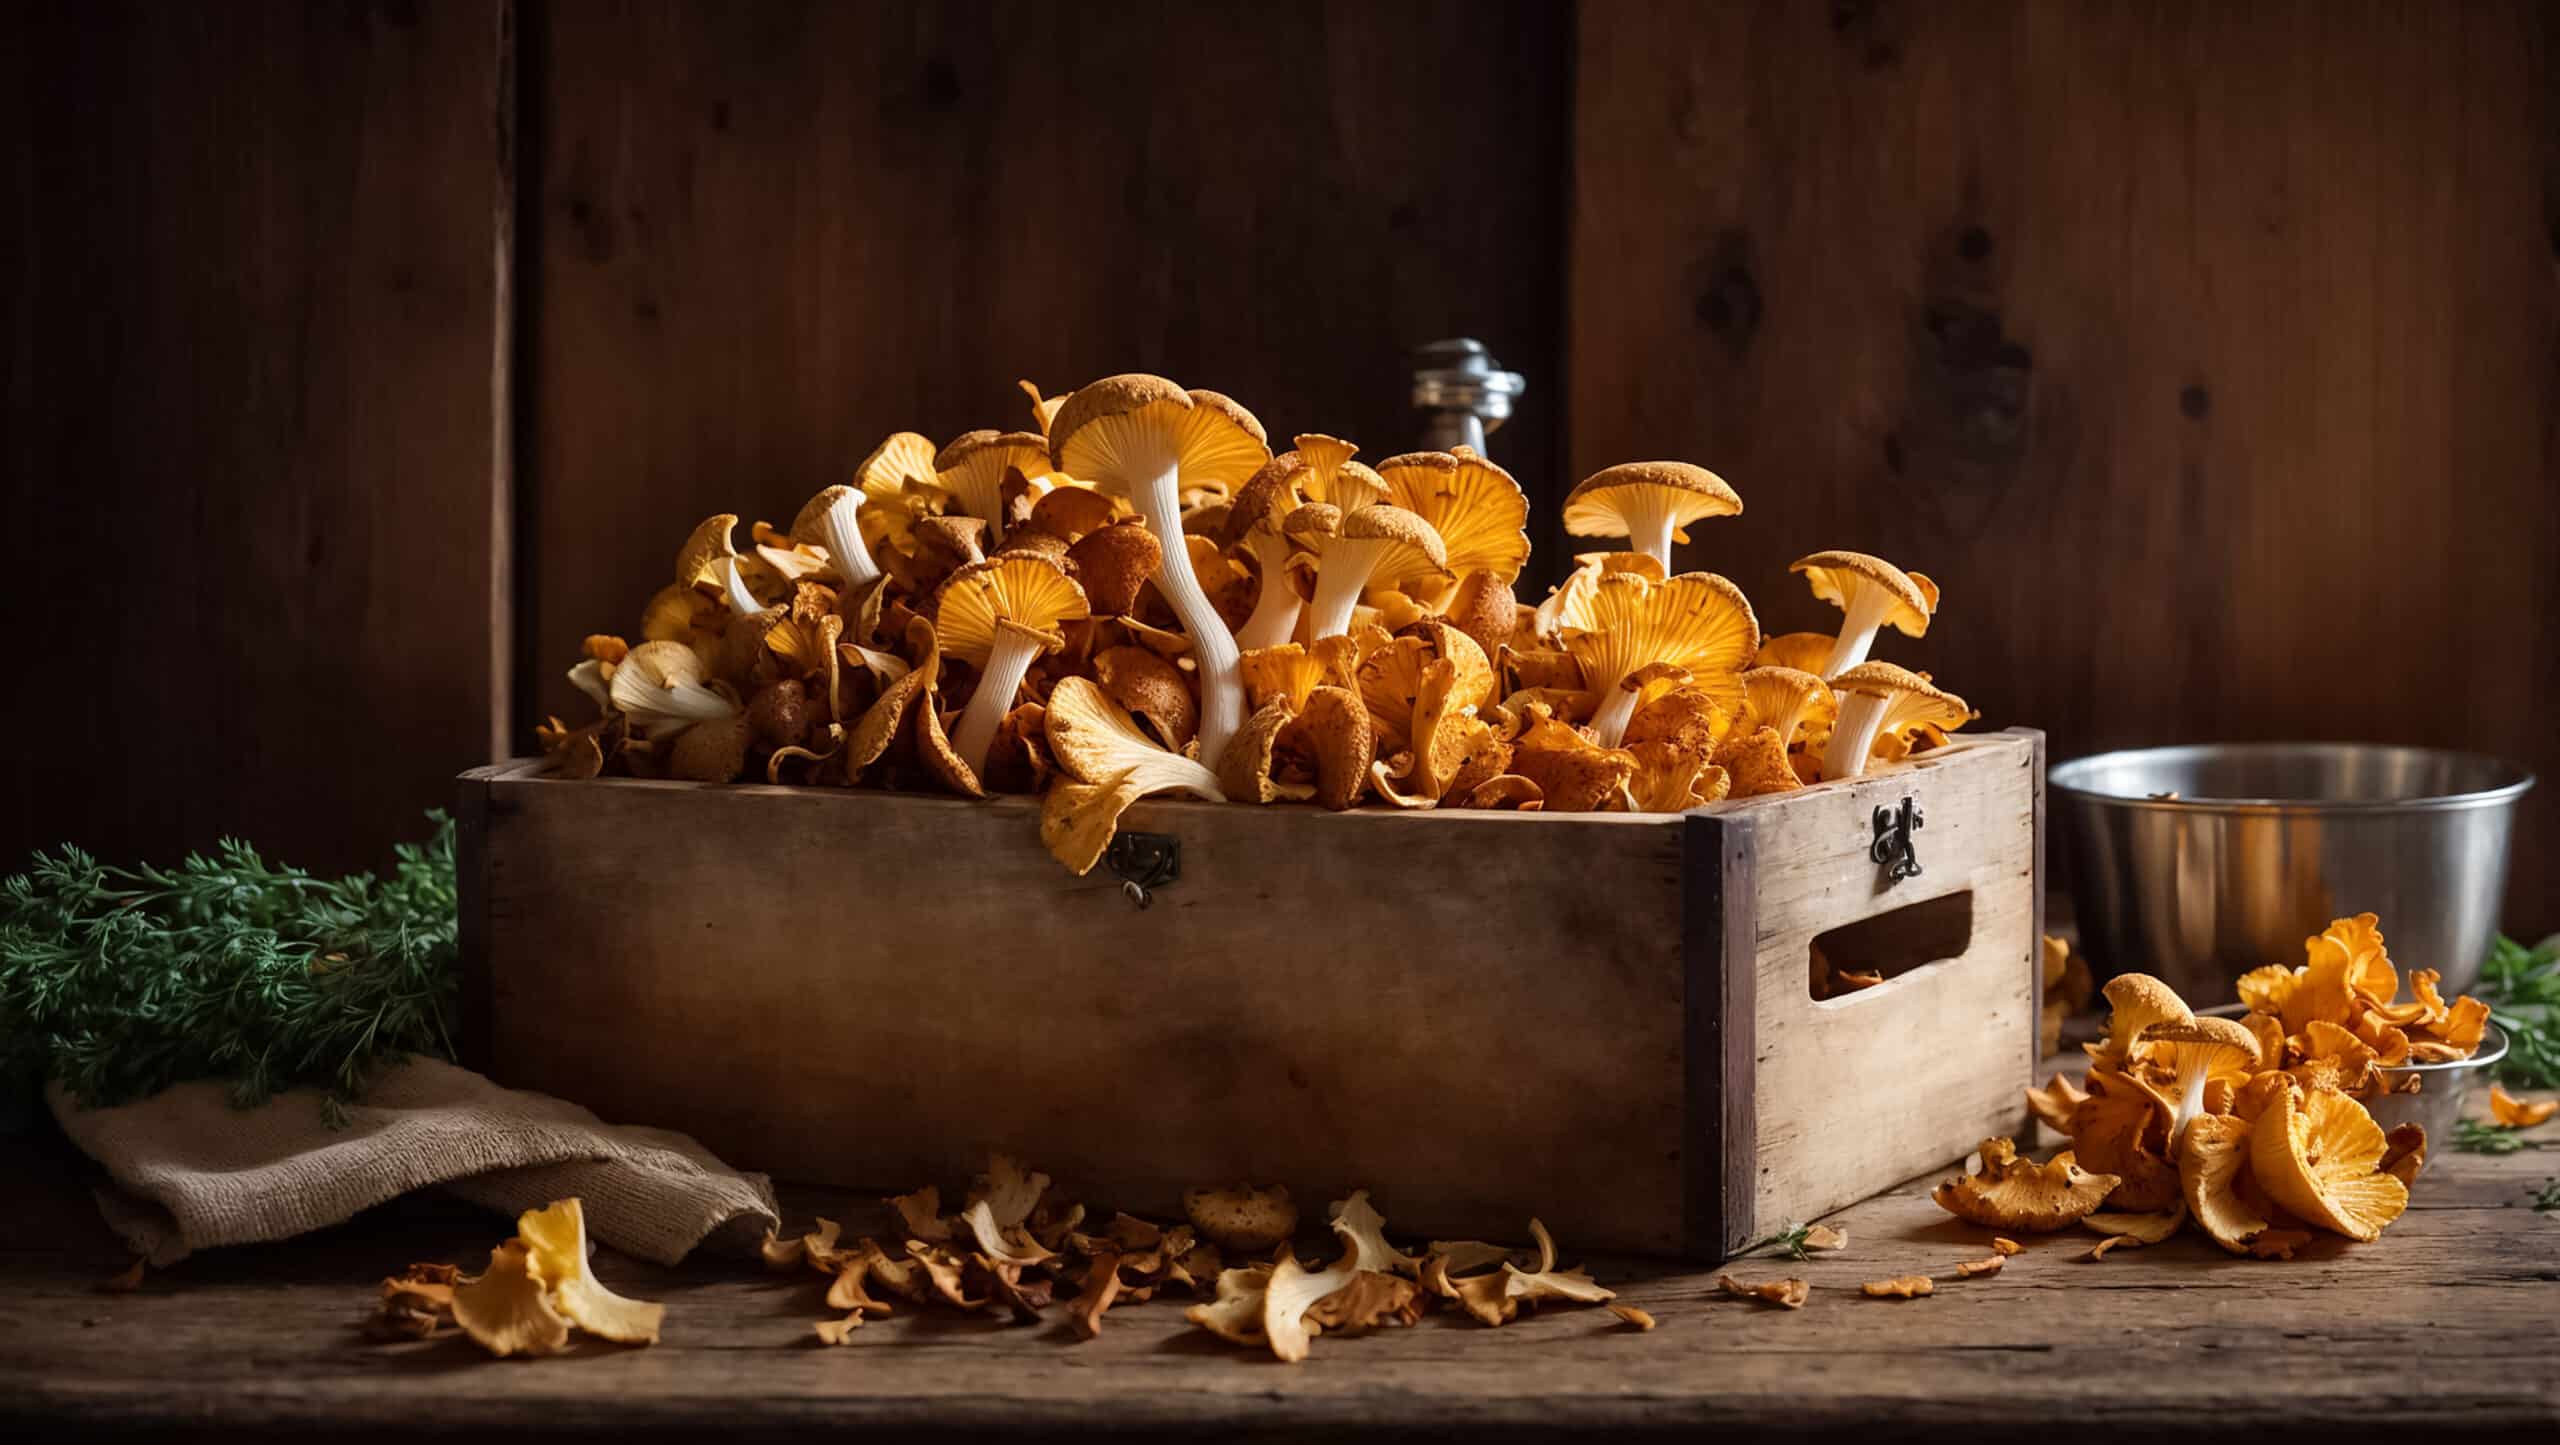 growmyownhealthfood.com : Can chicken of the woods be canned?